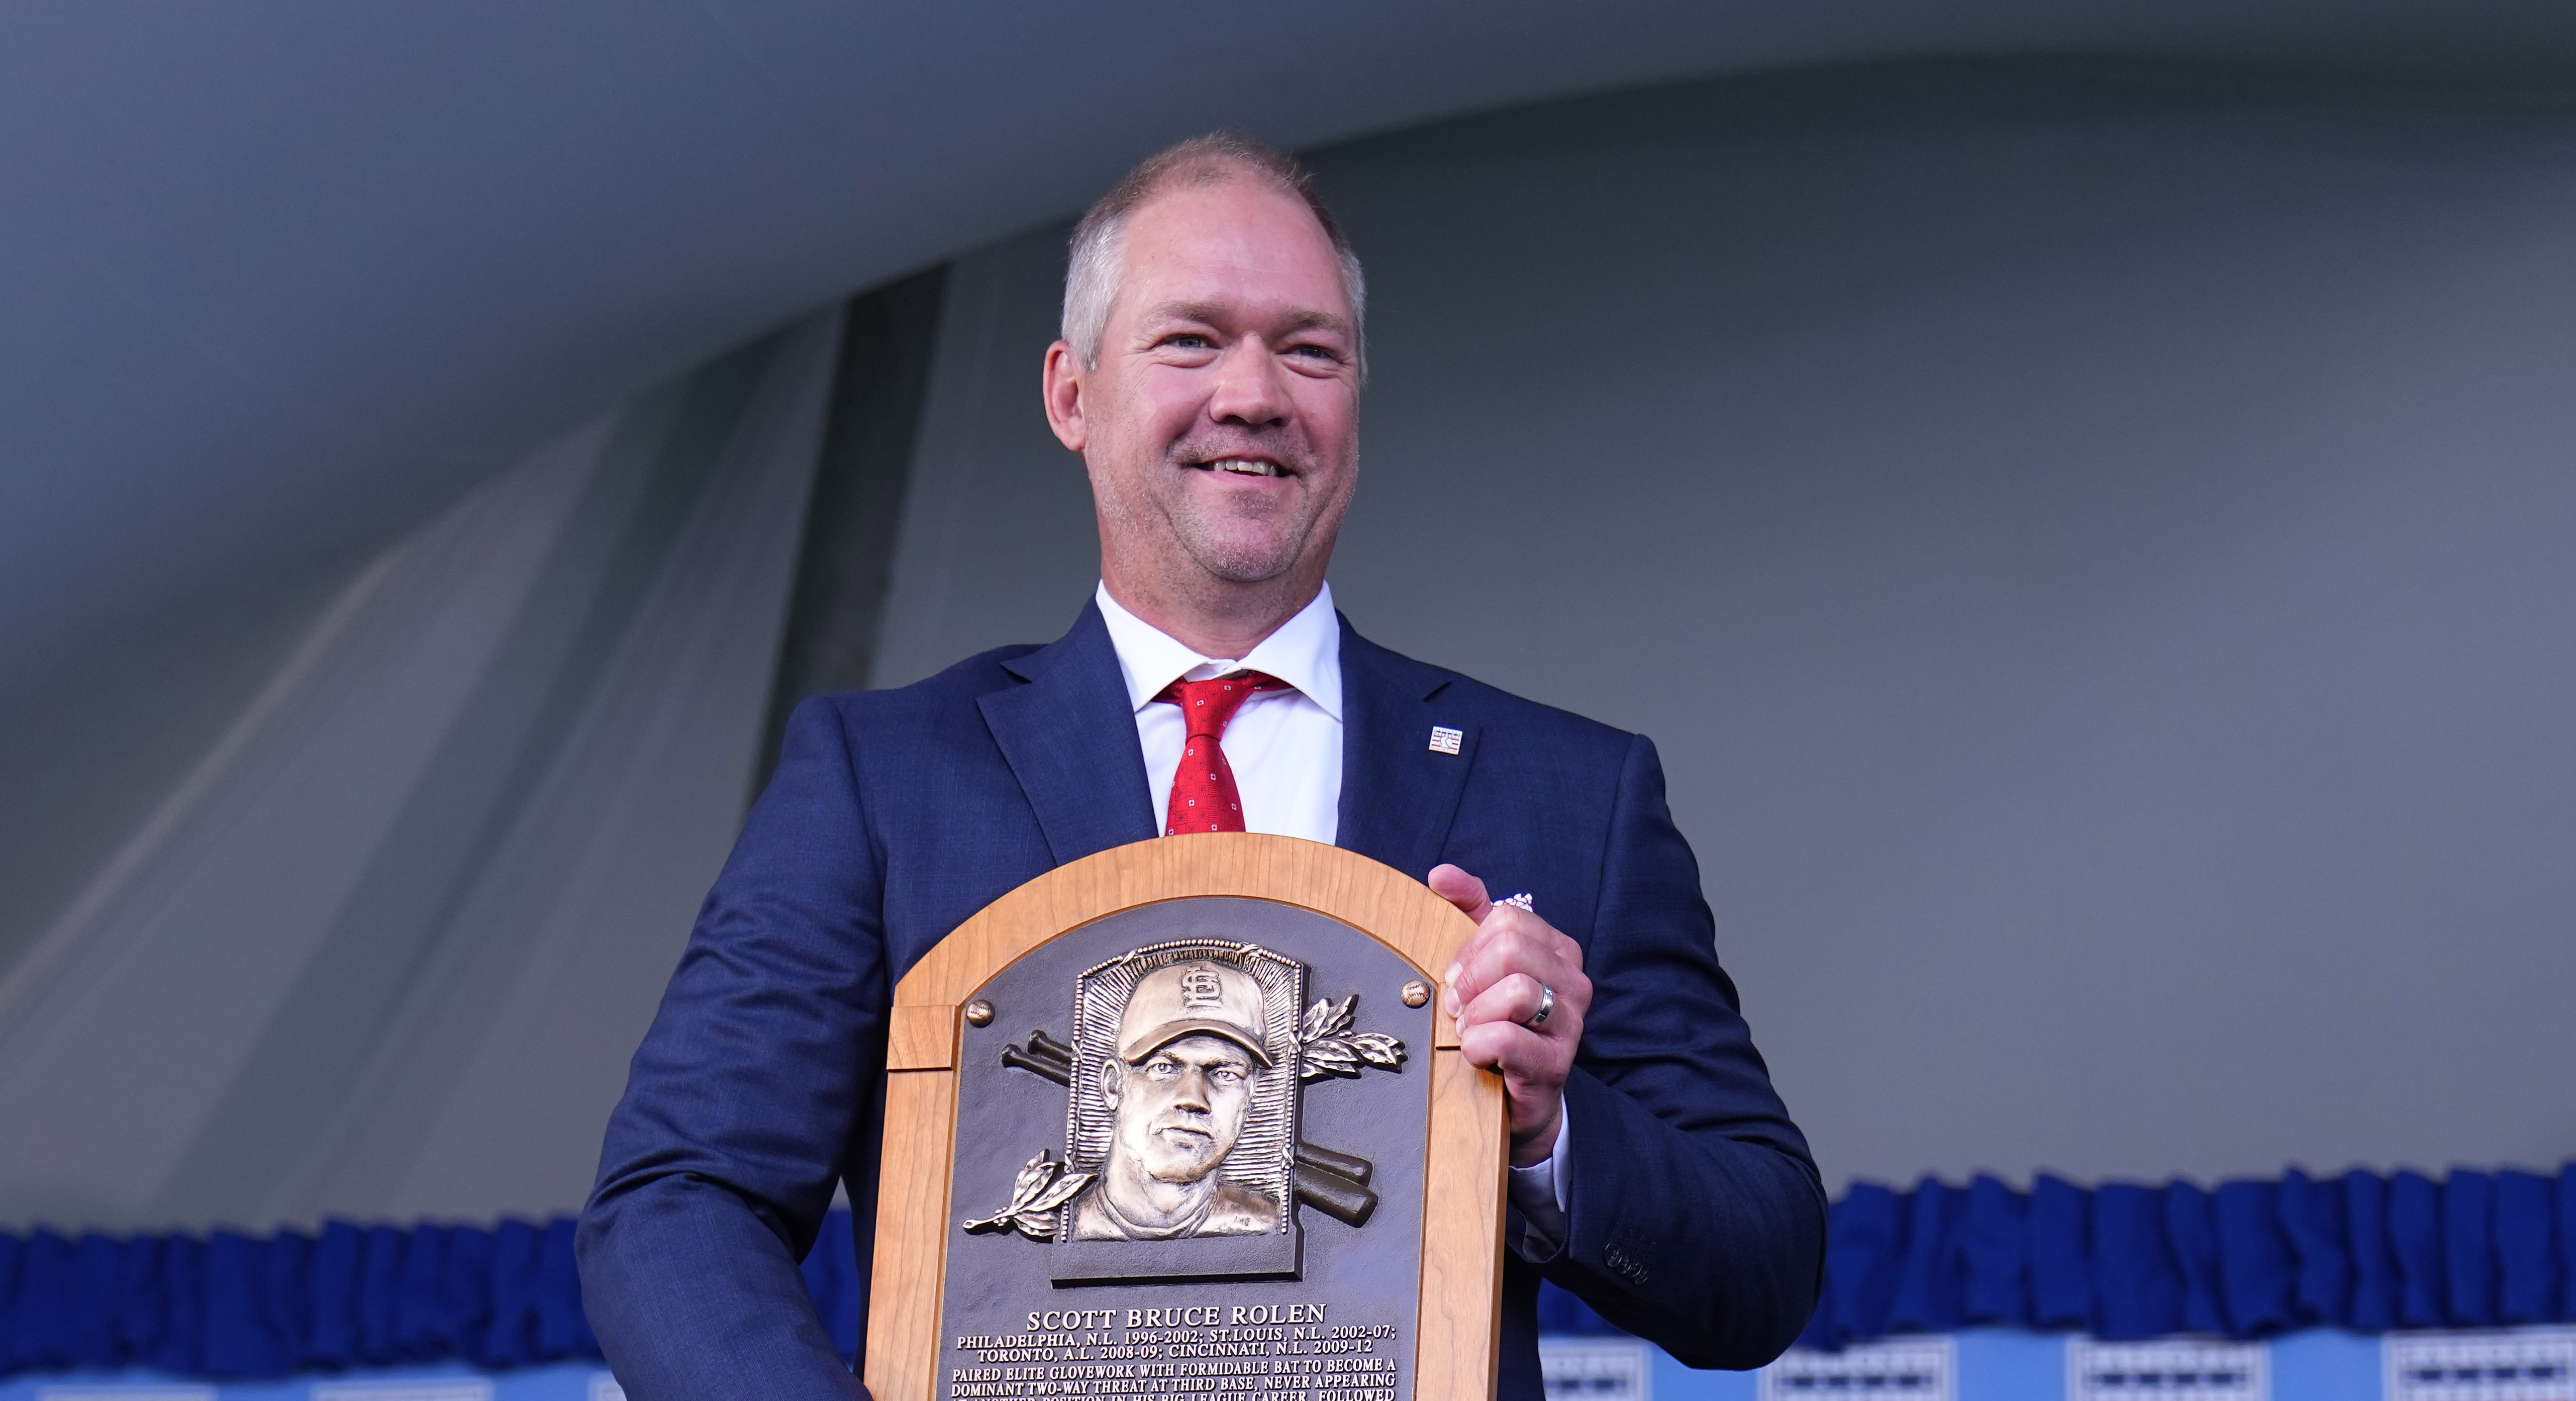 Phillies vs. Scott Rolen: At Hall of Fame induction, a history